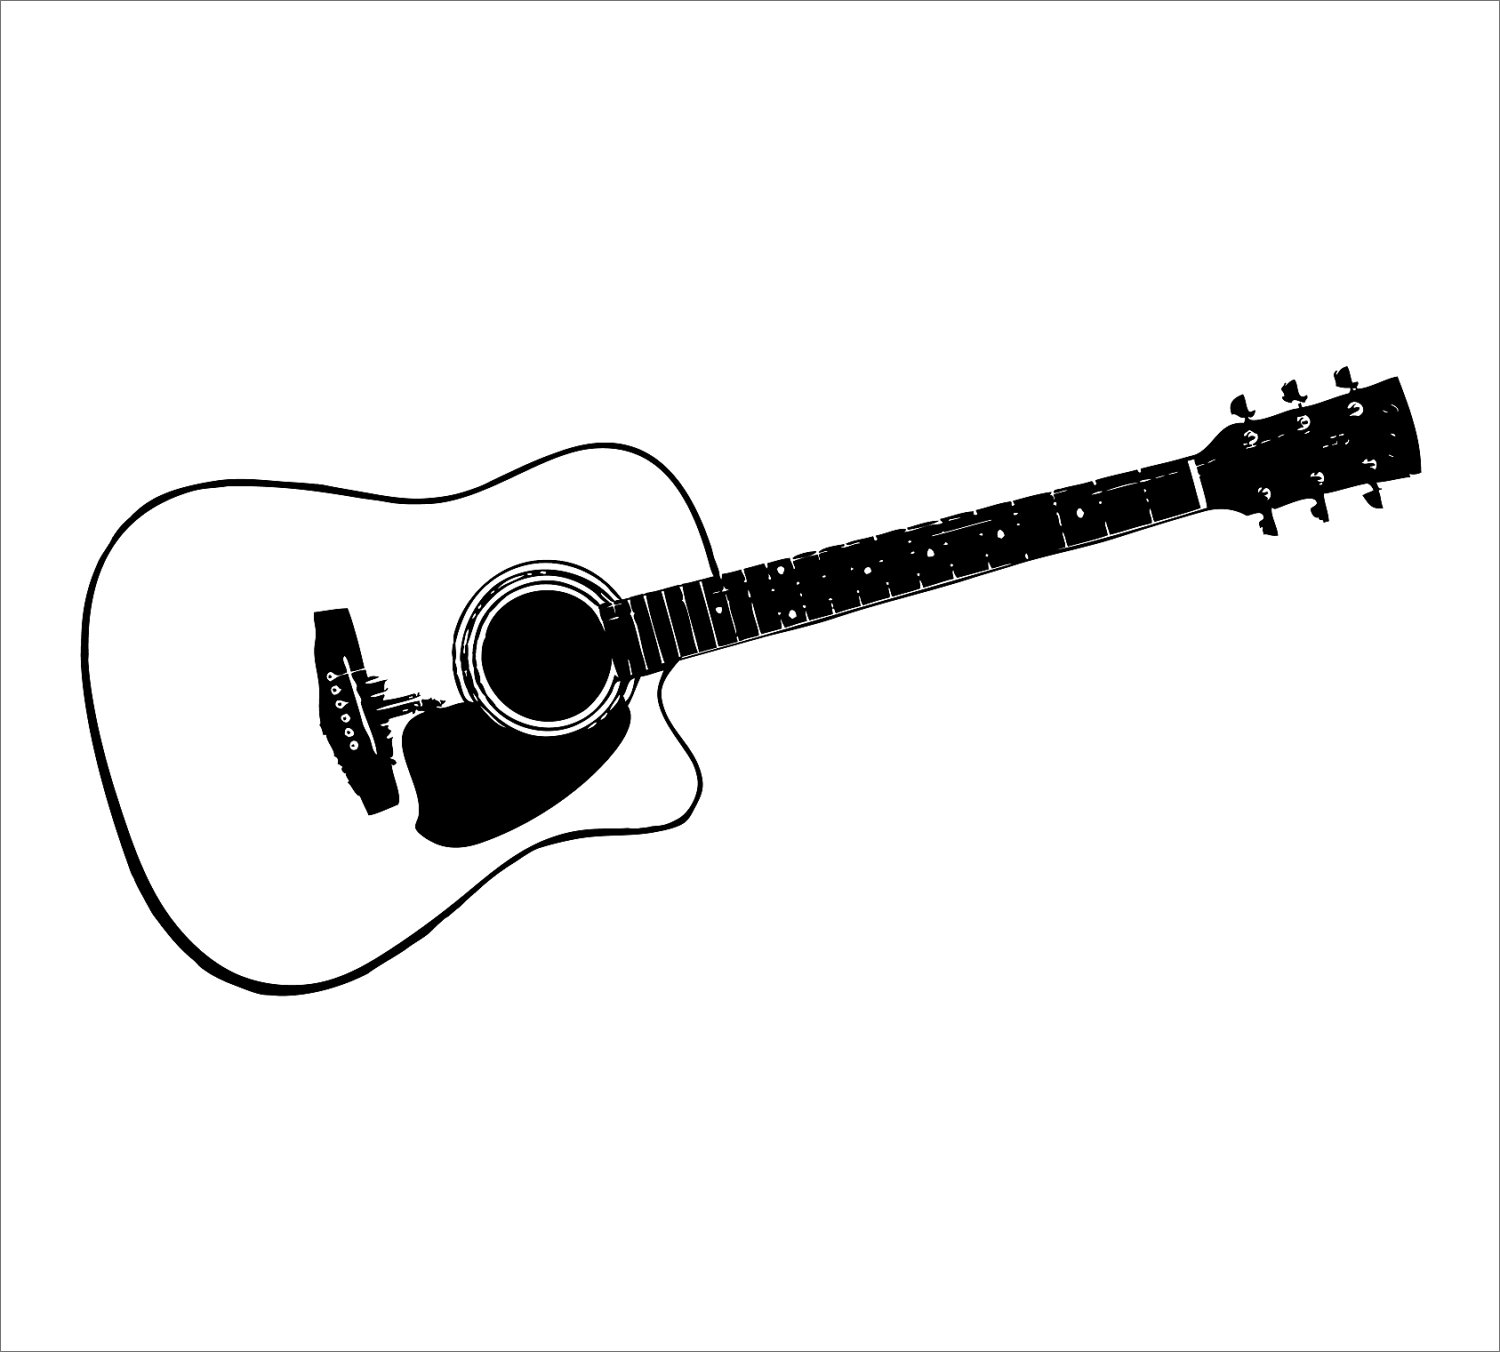 Free Acoustic Guitar Clipart, Download Free Clip Art, Free